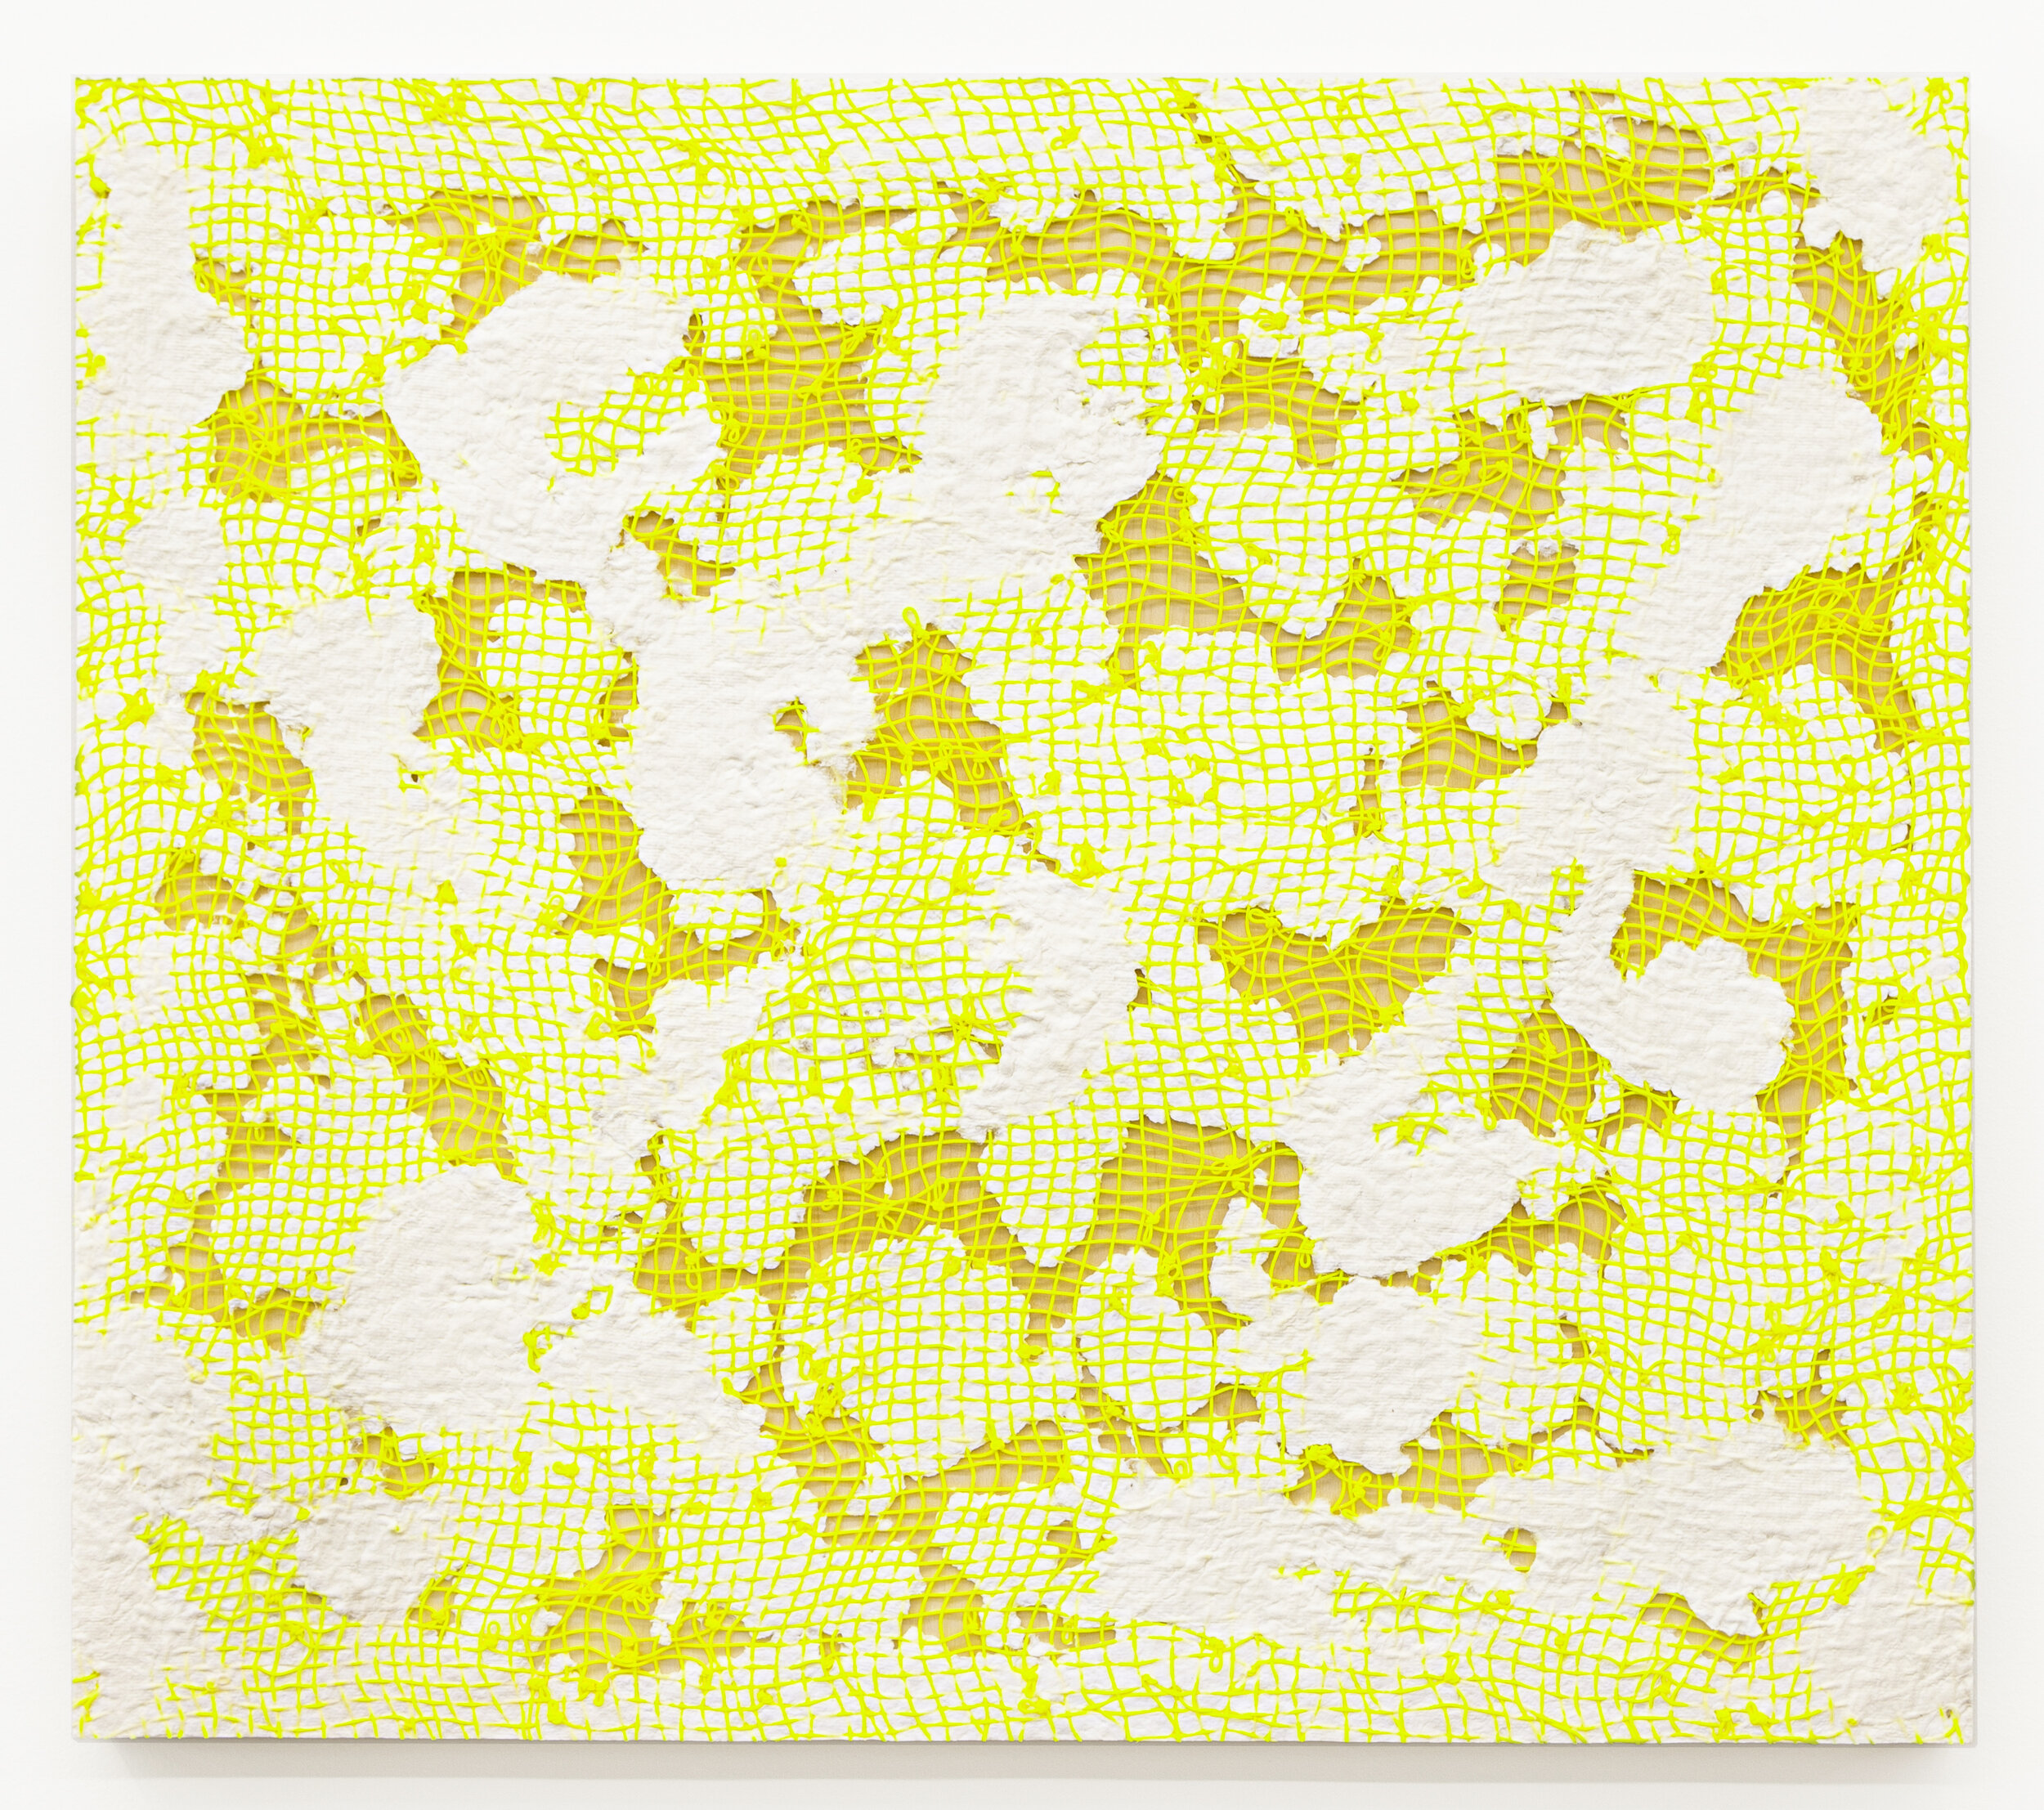 MIMI JUNG | Unsurfaced 2, 32.25 x 28.25 x 1.5 inches / 82 x 72 x 4 cm, poly cord, paper, and plywood, framed, 2020